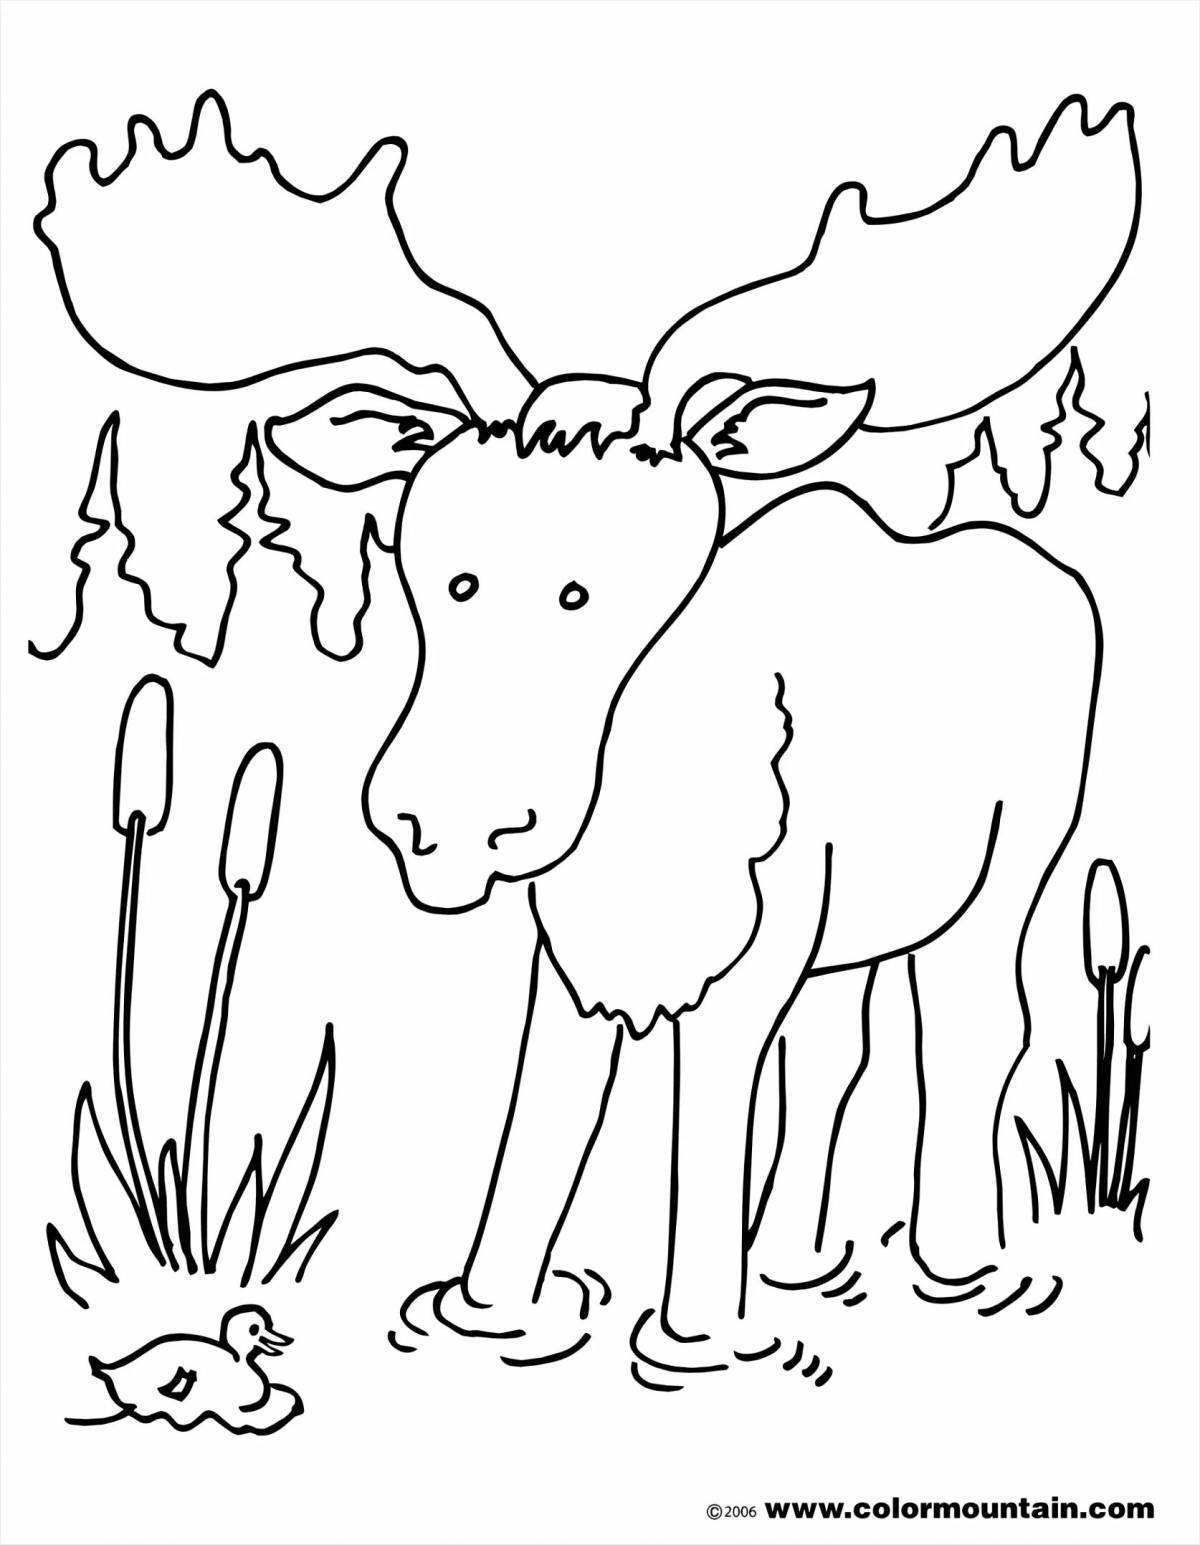 Awesome elk coloring book for 6-7 year olds